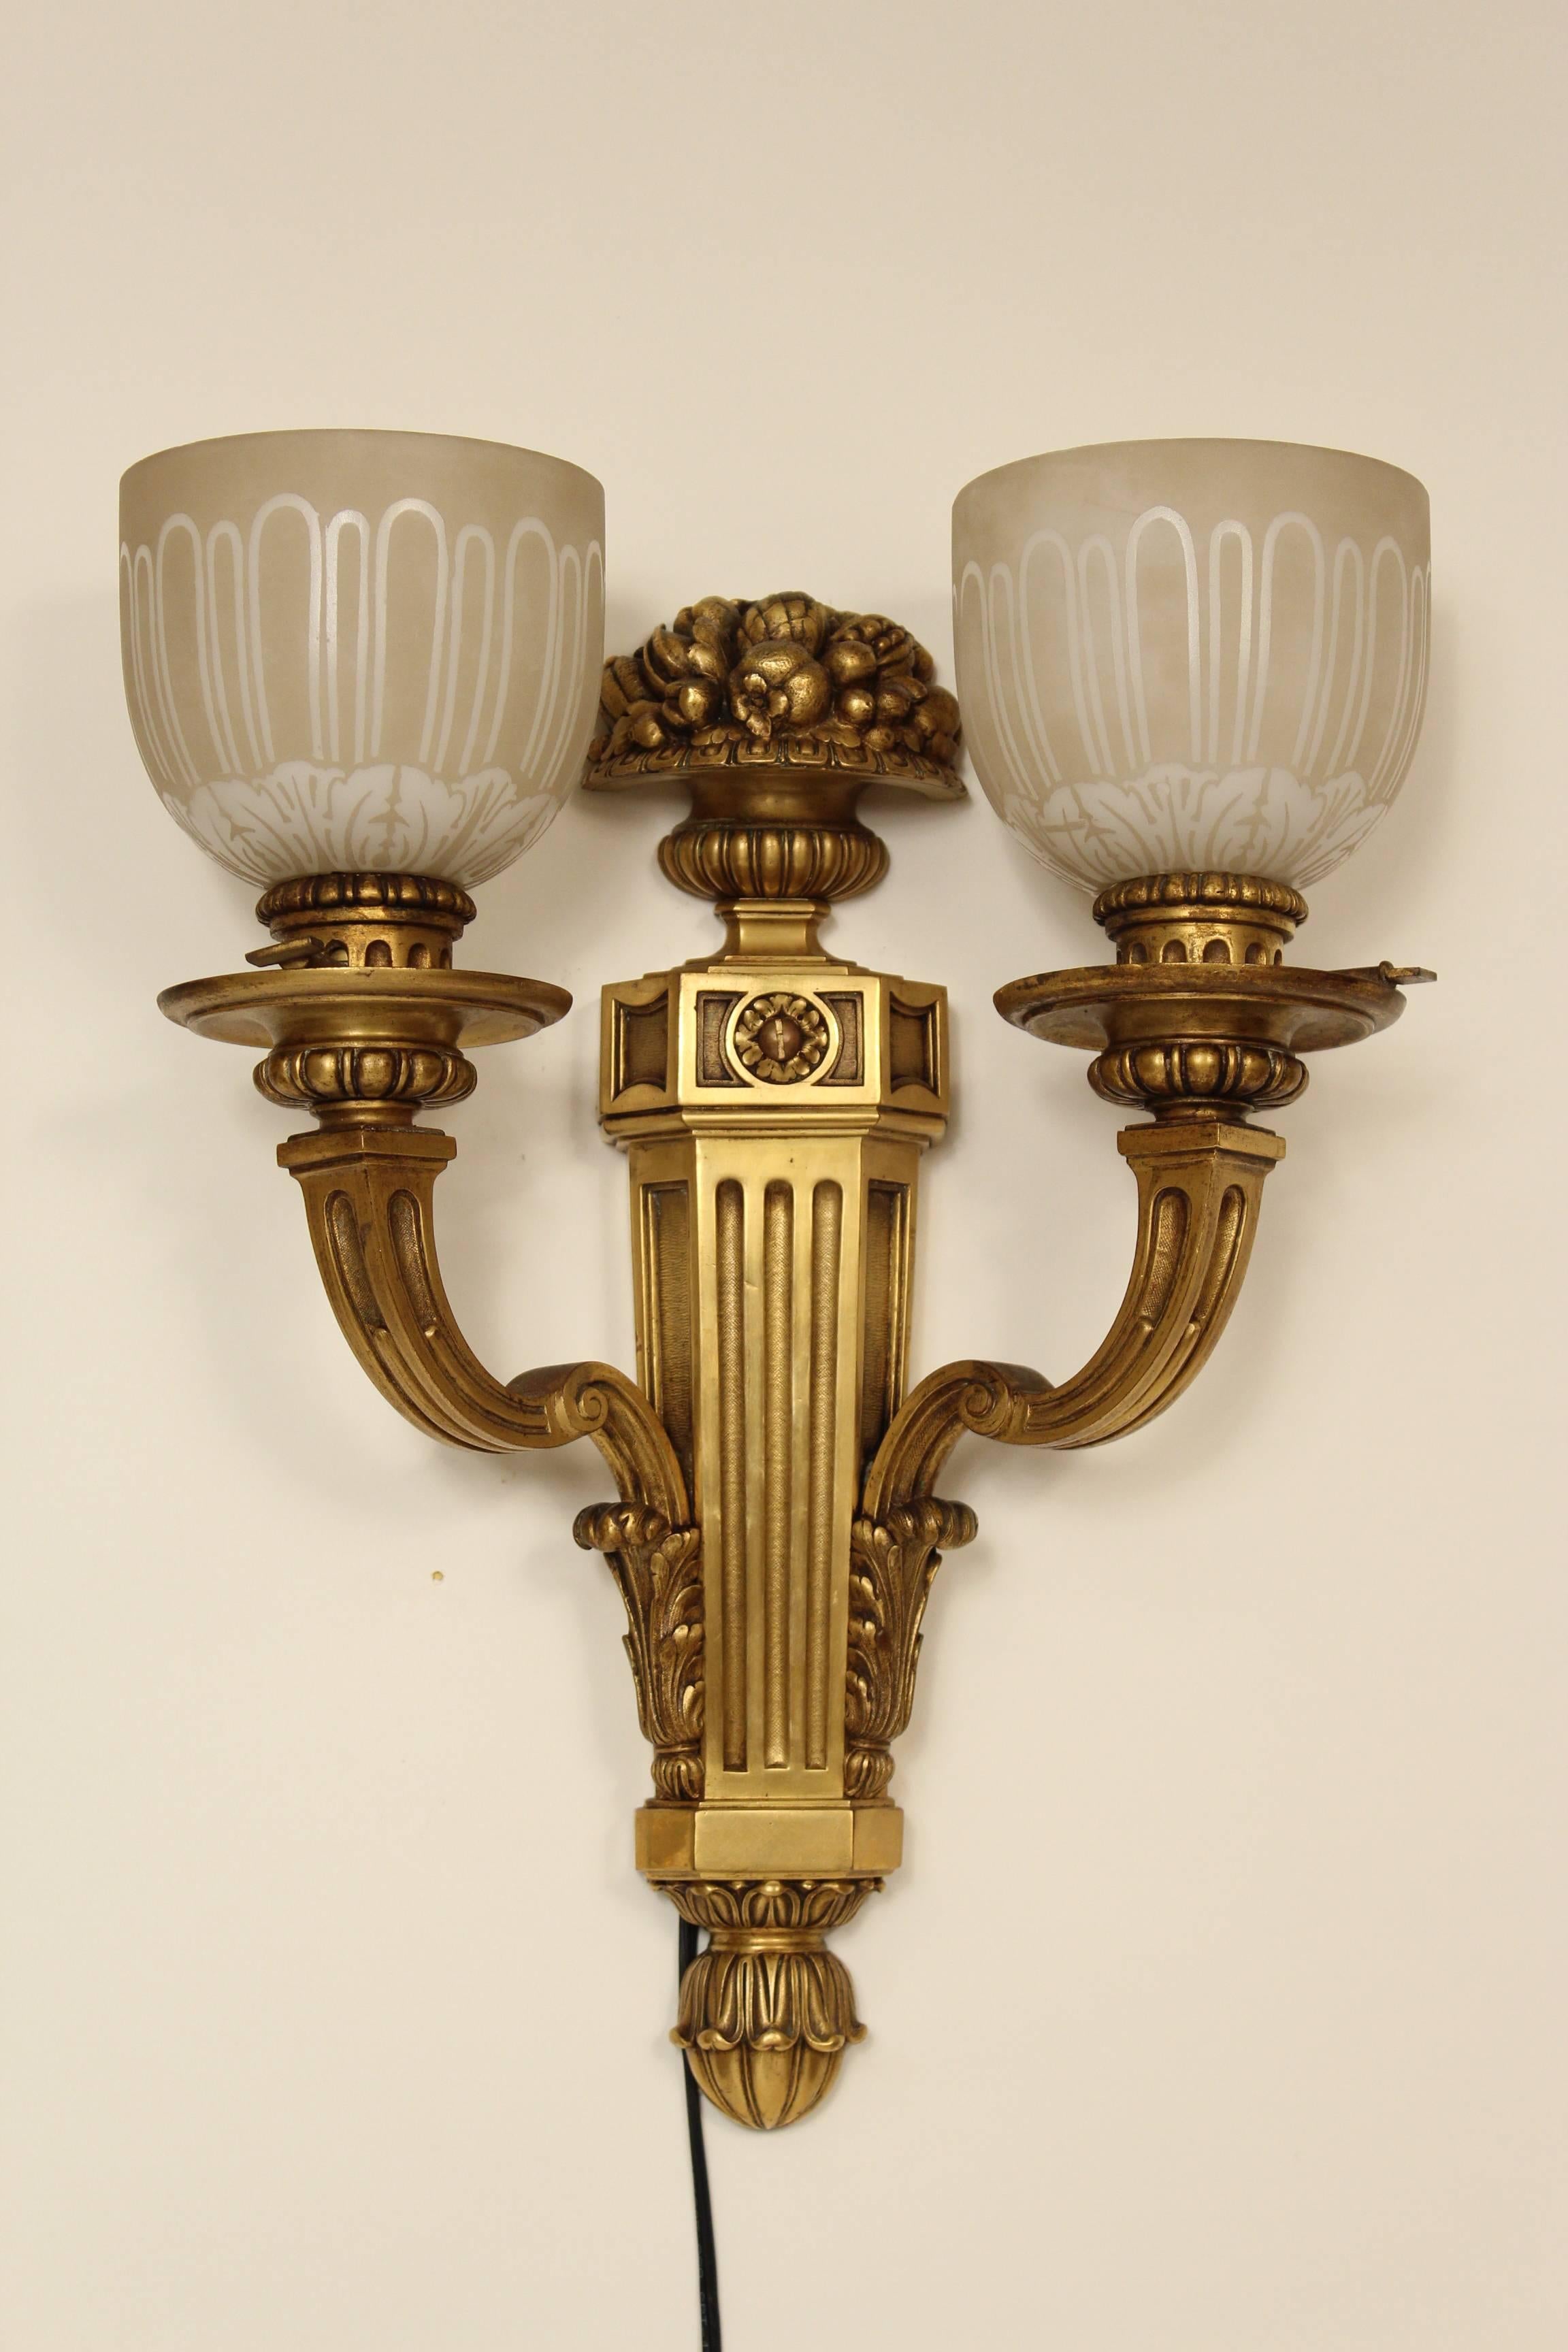 Pair of Louis XIV style gilt bronze two-light wall sconces with acid etched glass shades, circa 1920.